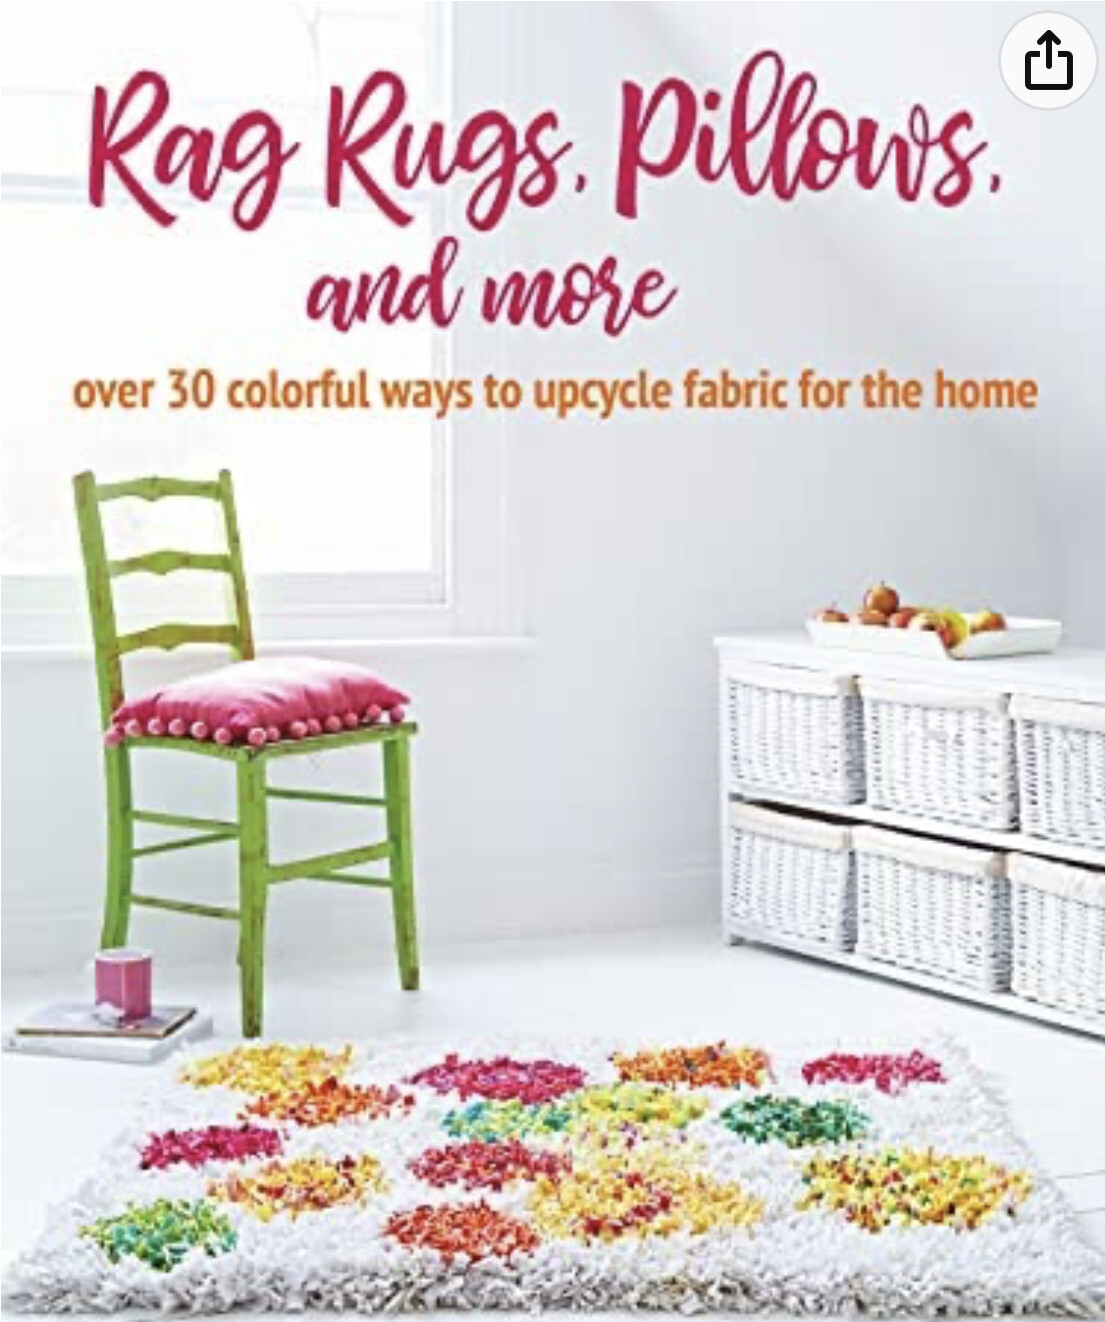 Rags Rugs, Pillows